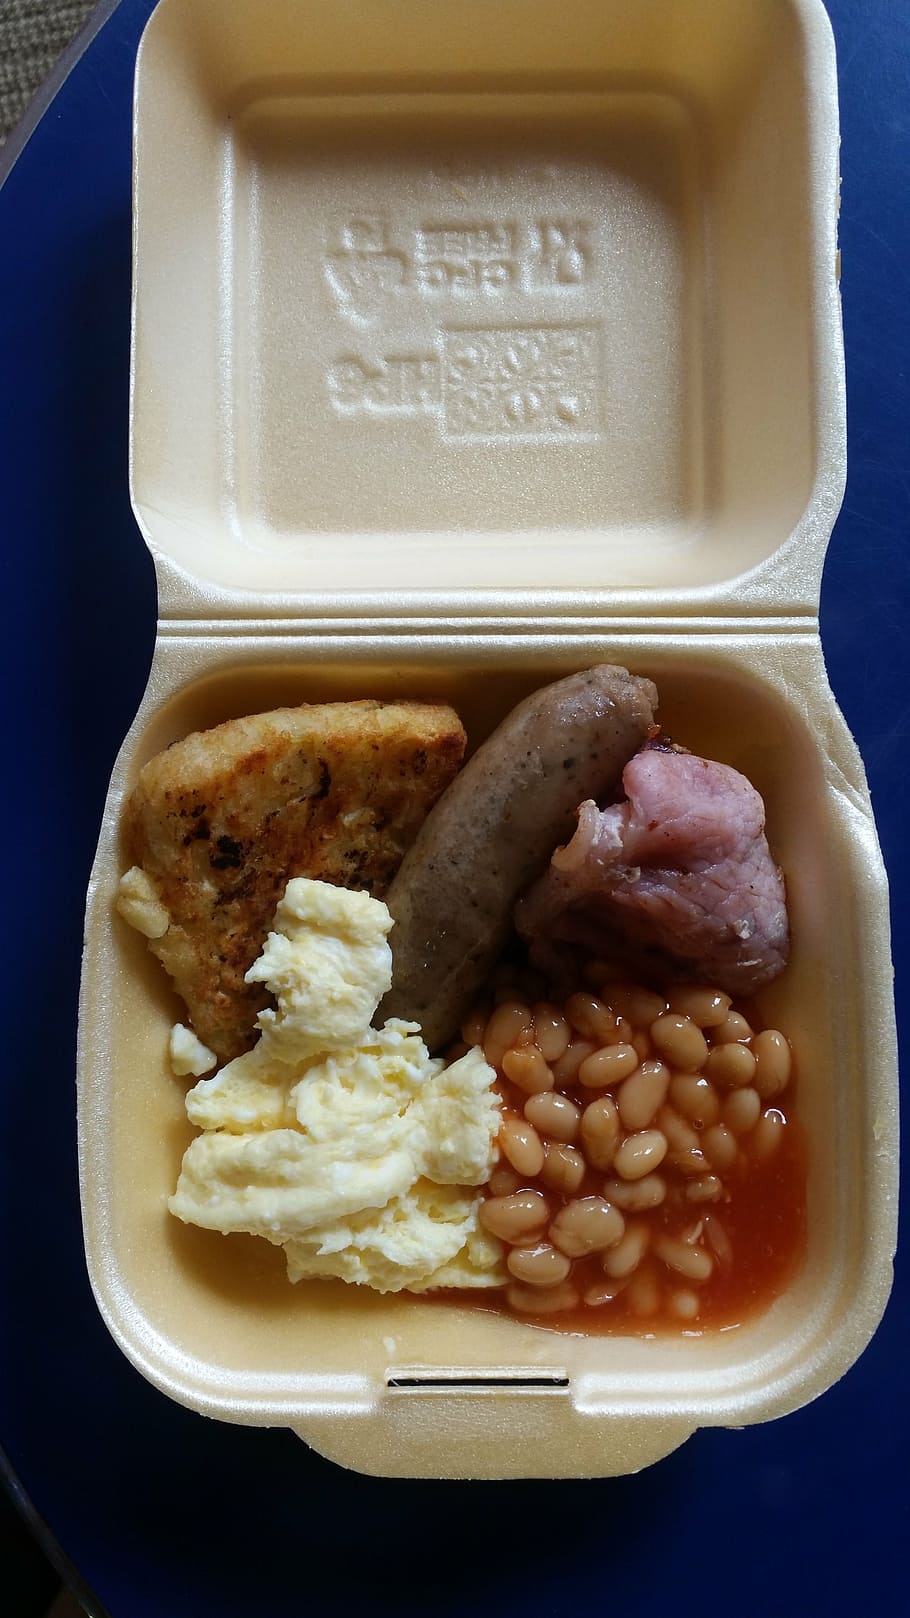 breakfast to go, breakfast, food, morning, eating, egg, beans, bacon, sausage, food and drink